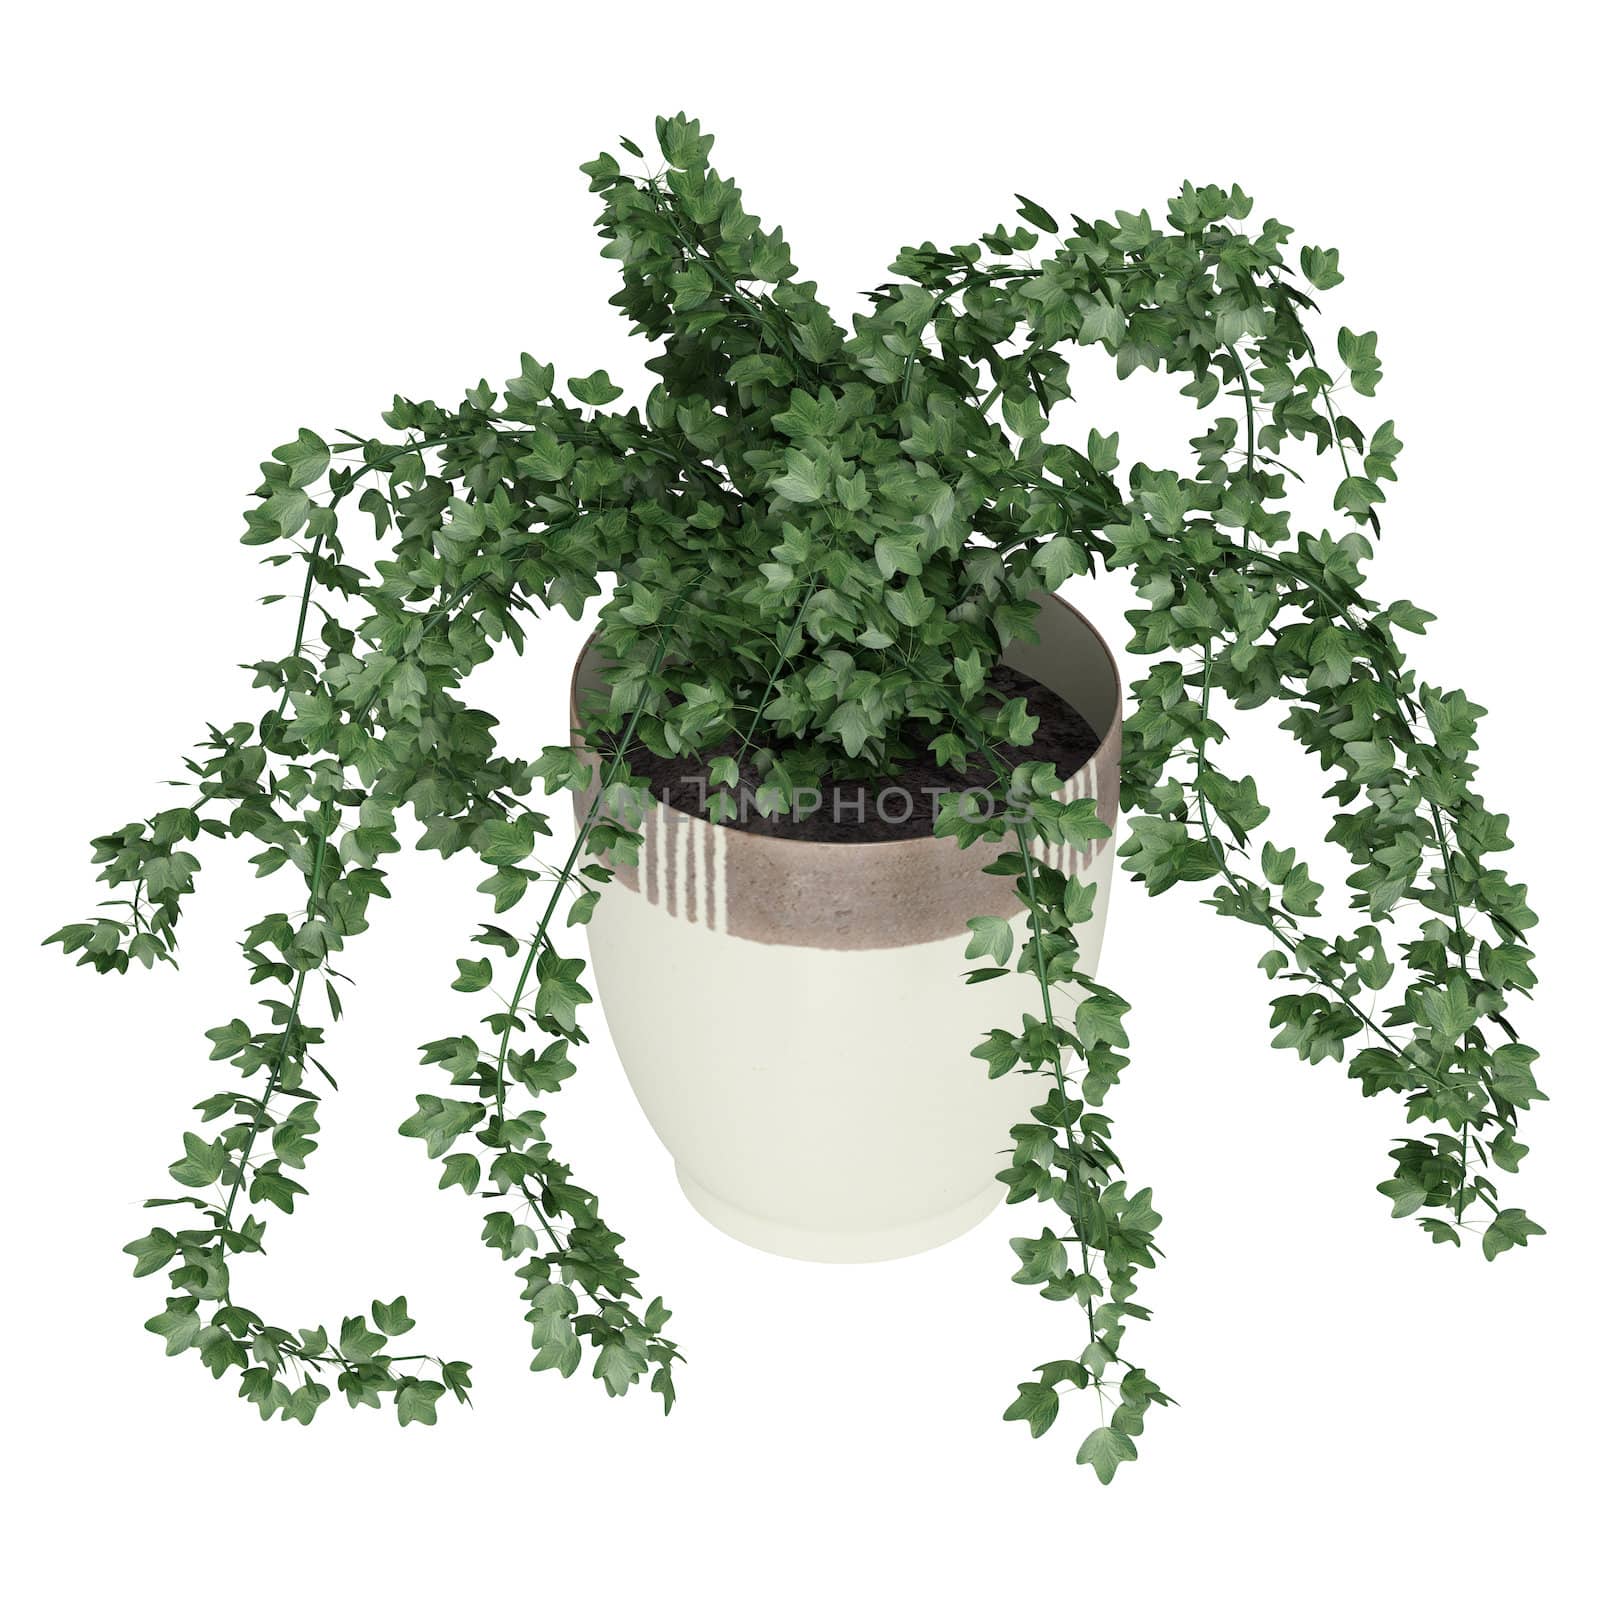 Potted ivy plant trailing over the edges of a ceramic a container for use indoors as a decorative houseplant isolated on white